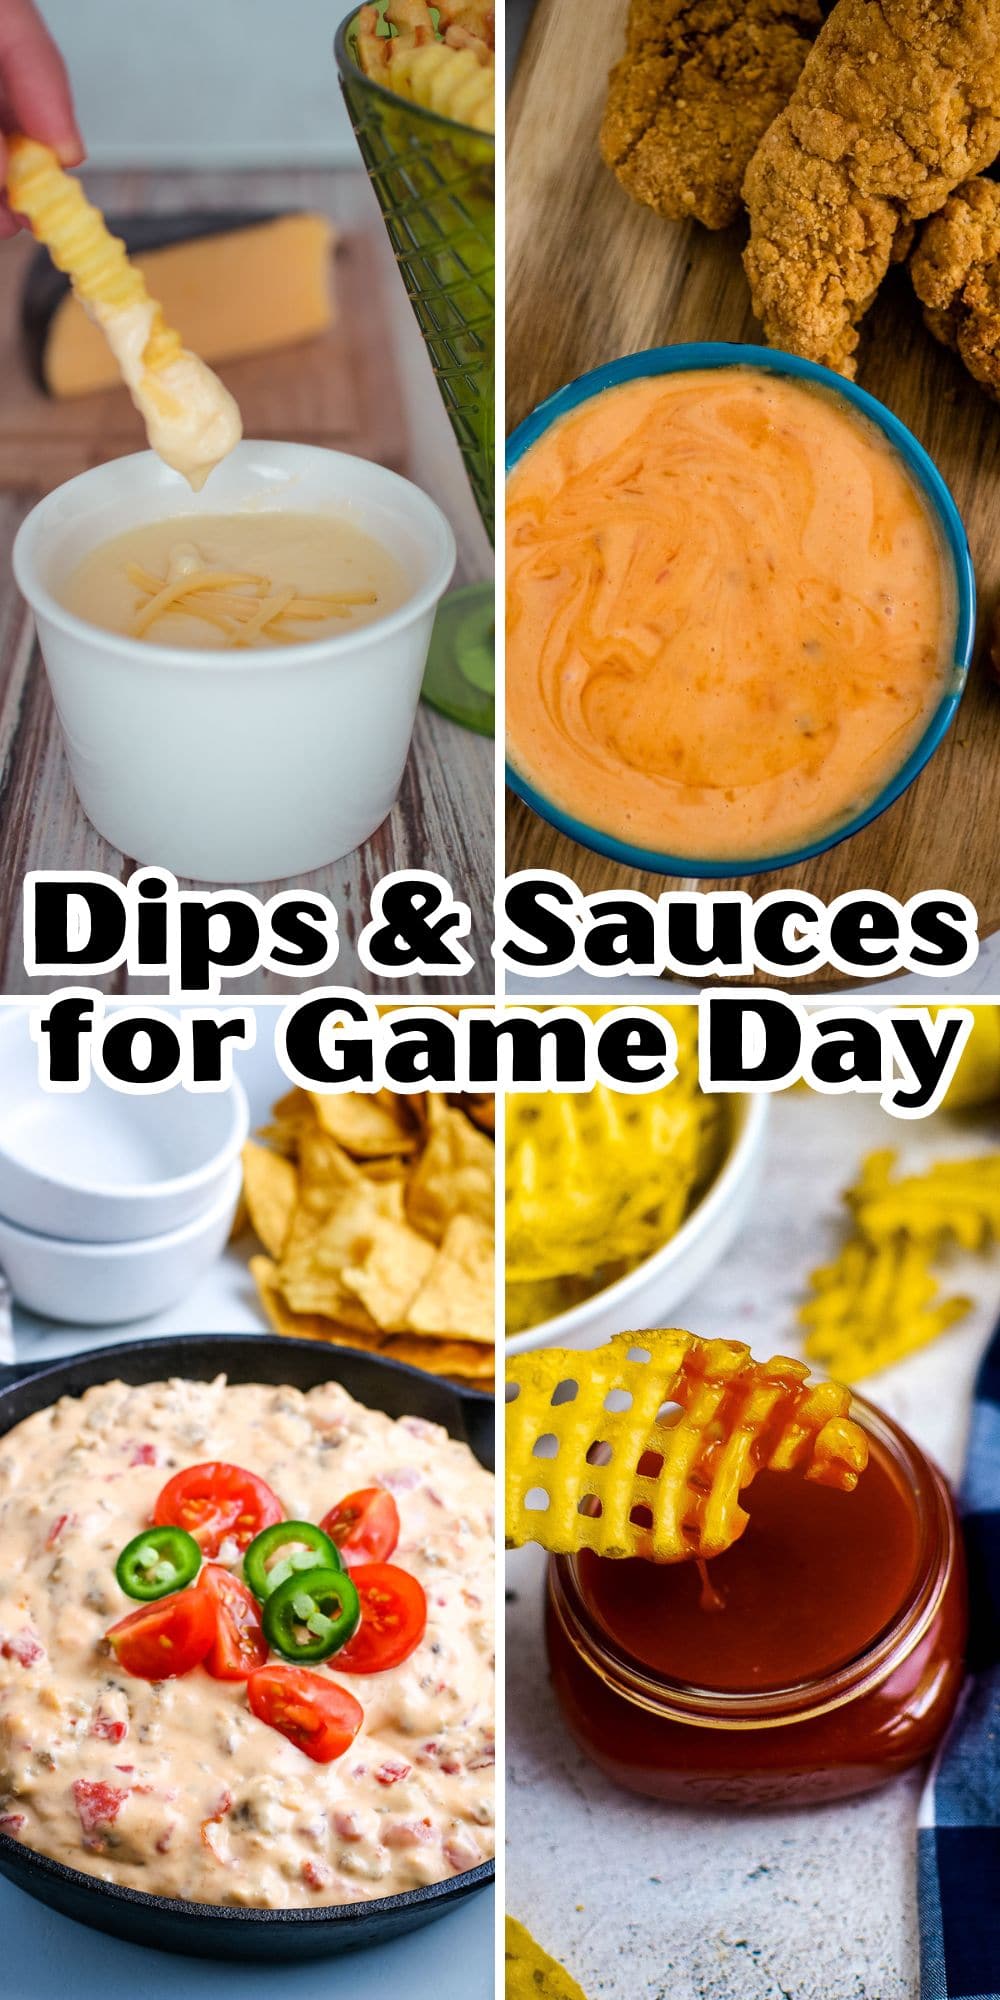 Dips and sauces for game day.